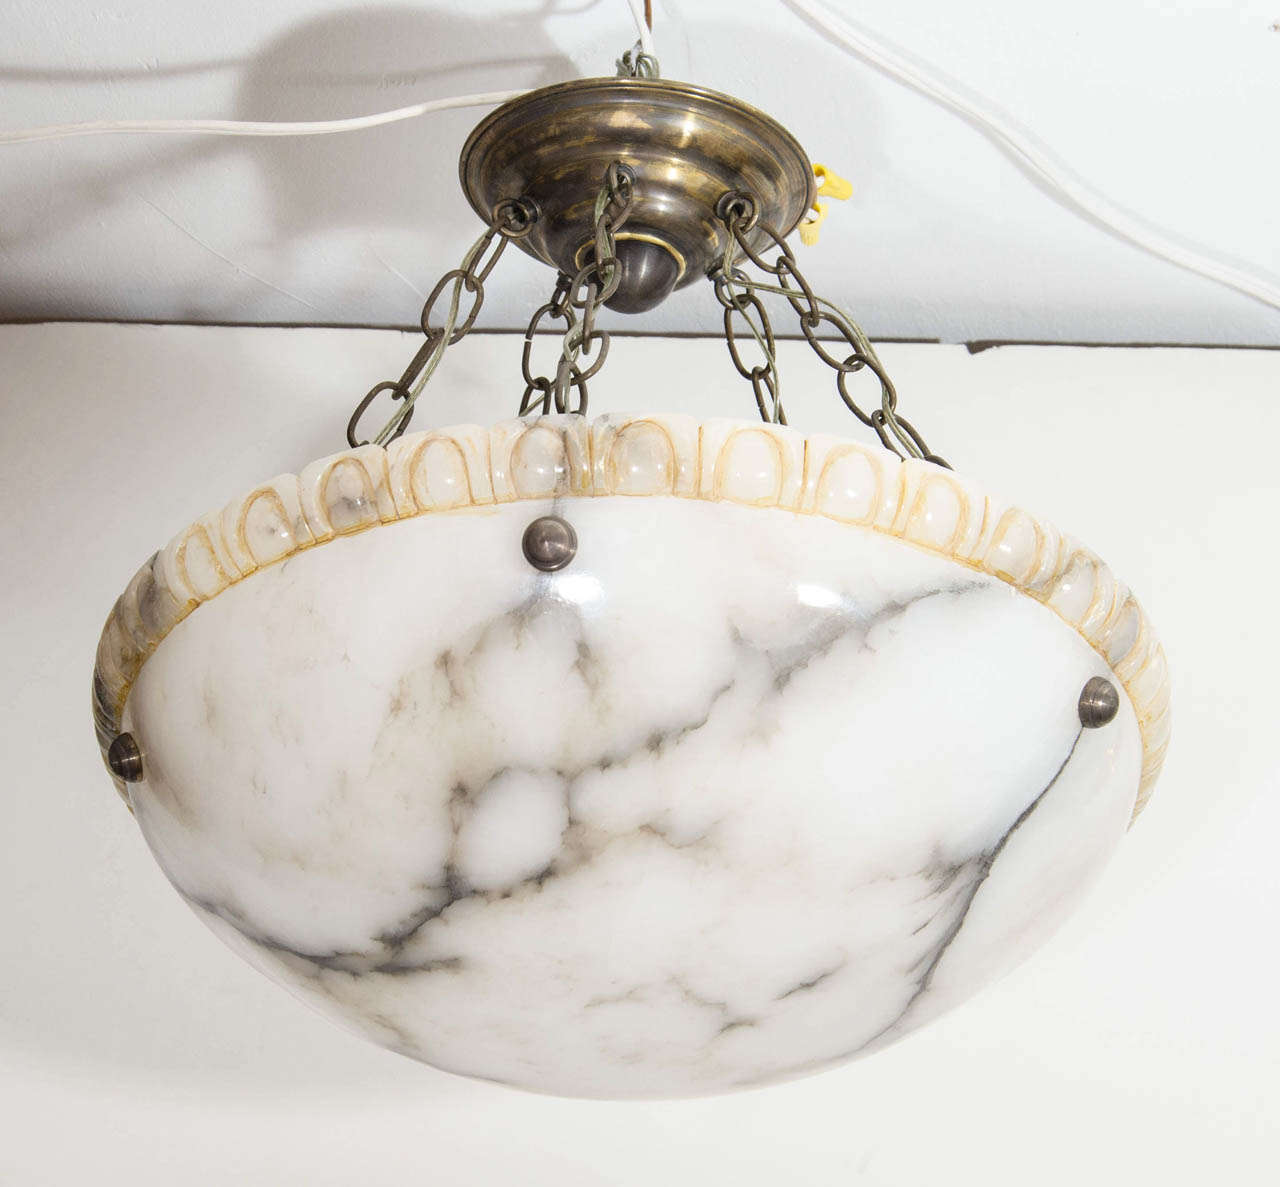 Creamy white alabaster, lined with charcoal mineral veining, this fixture is crowned with a decorative, dental-style upper rim, enriched with umber tones. Suspended on five original chains, brass canopy and hardware, the fixture may be custom wired